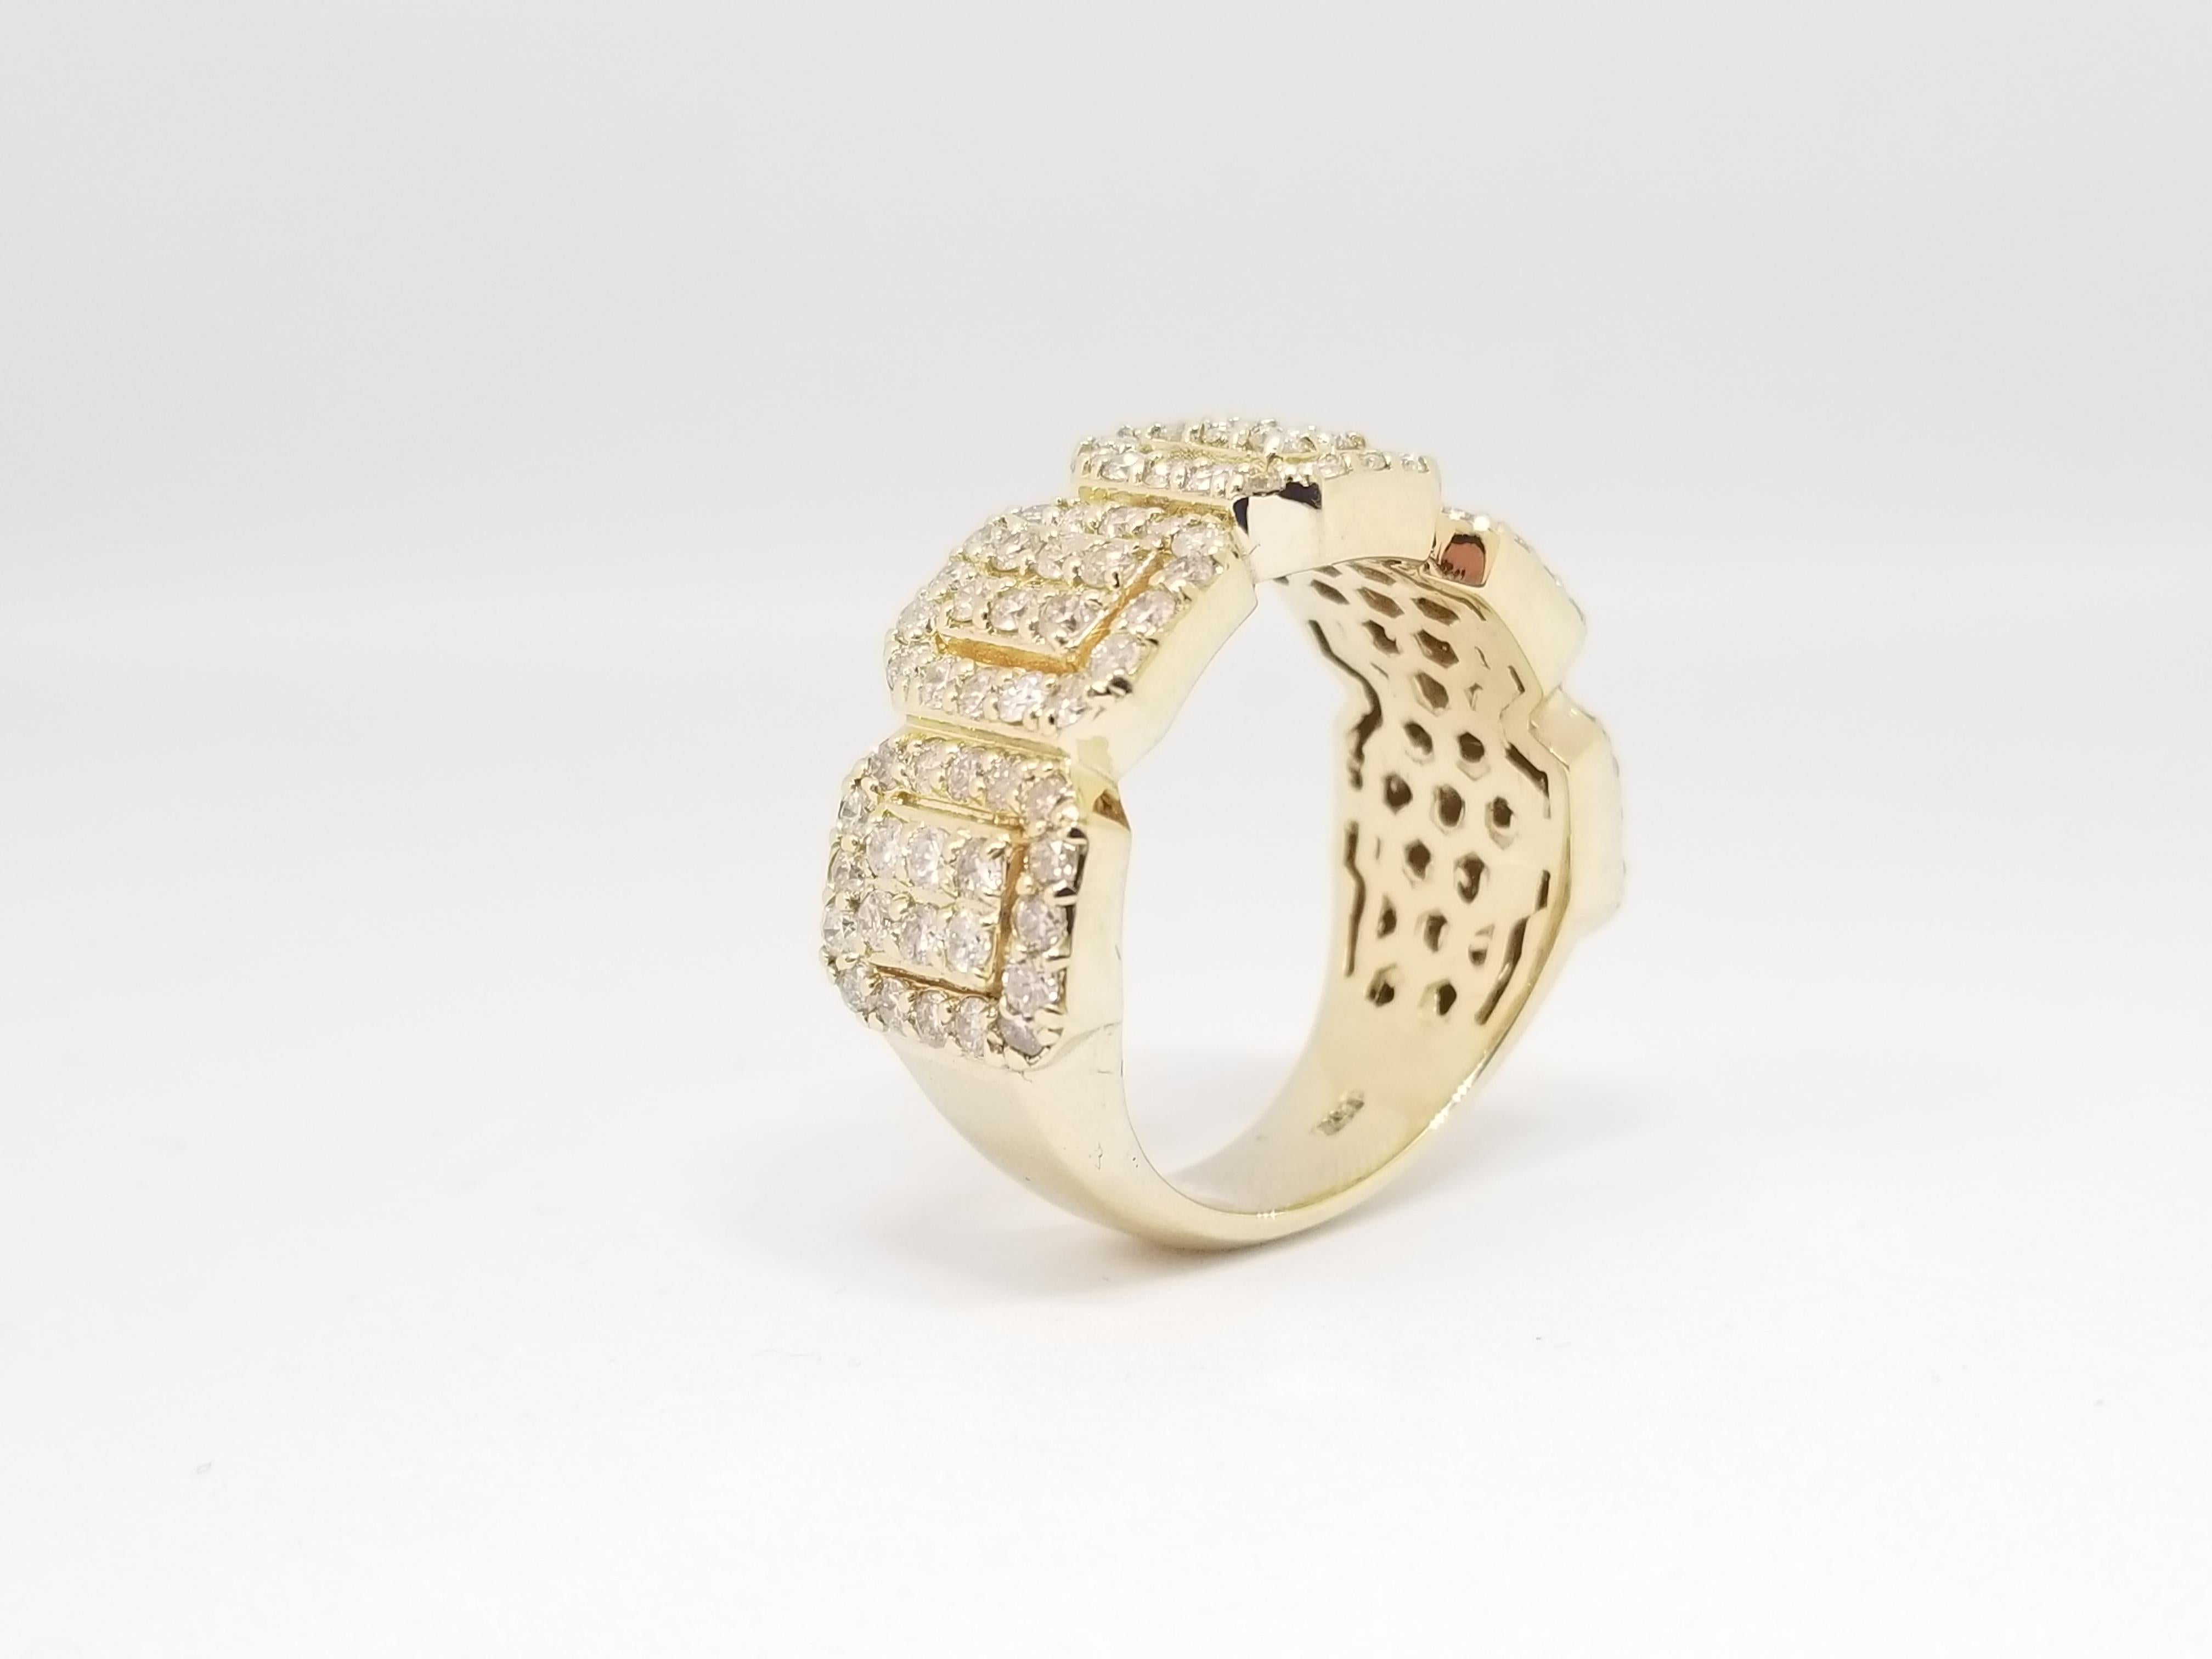 NATURAL SHINY DIAMONDS DOME RING, SOLID YELLOW GOLD.
Average Color: I, Clarity: SI
Ring Size: 10.5
10 mm Width
13 grams